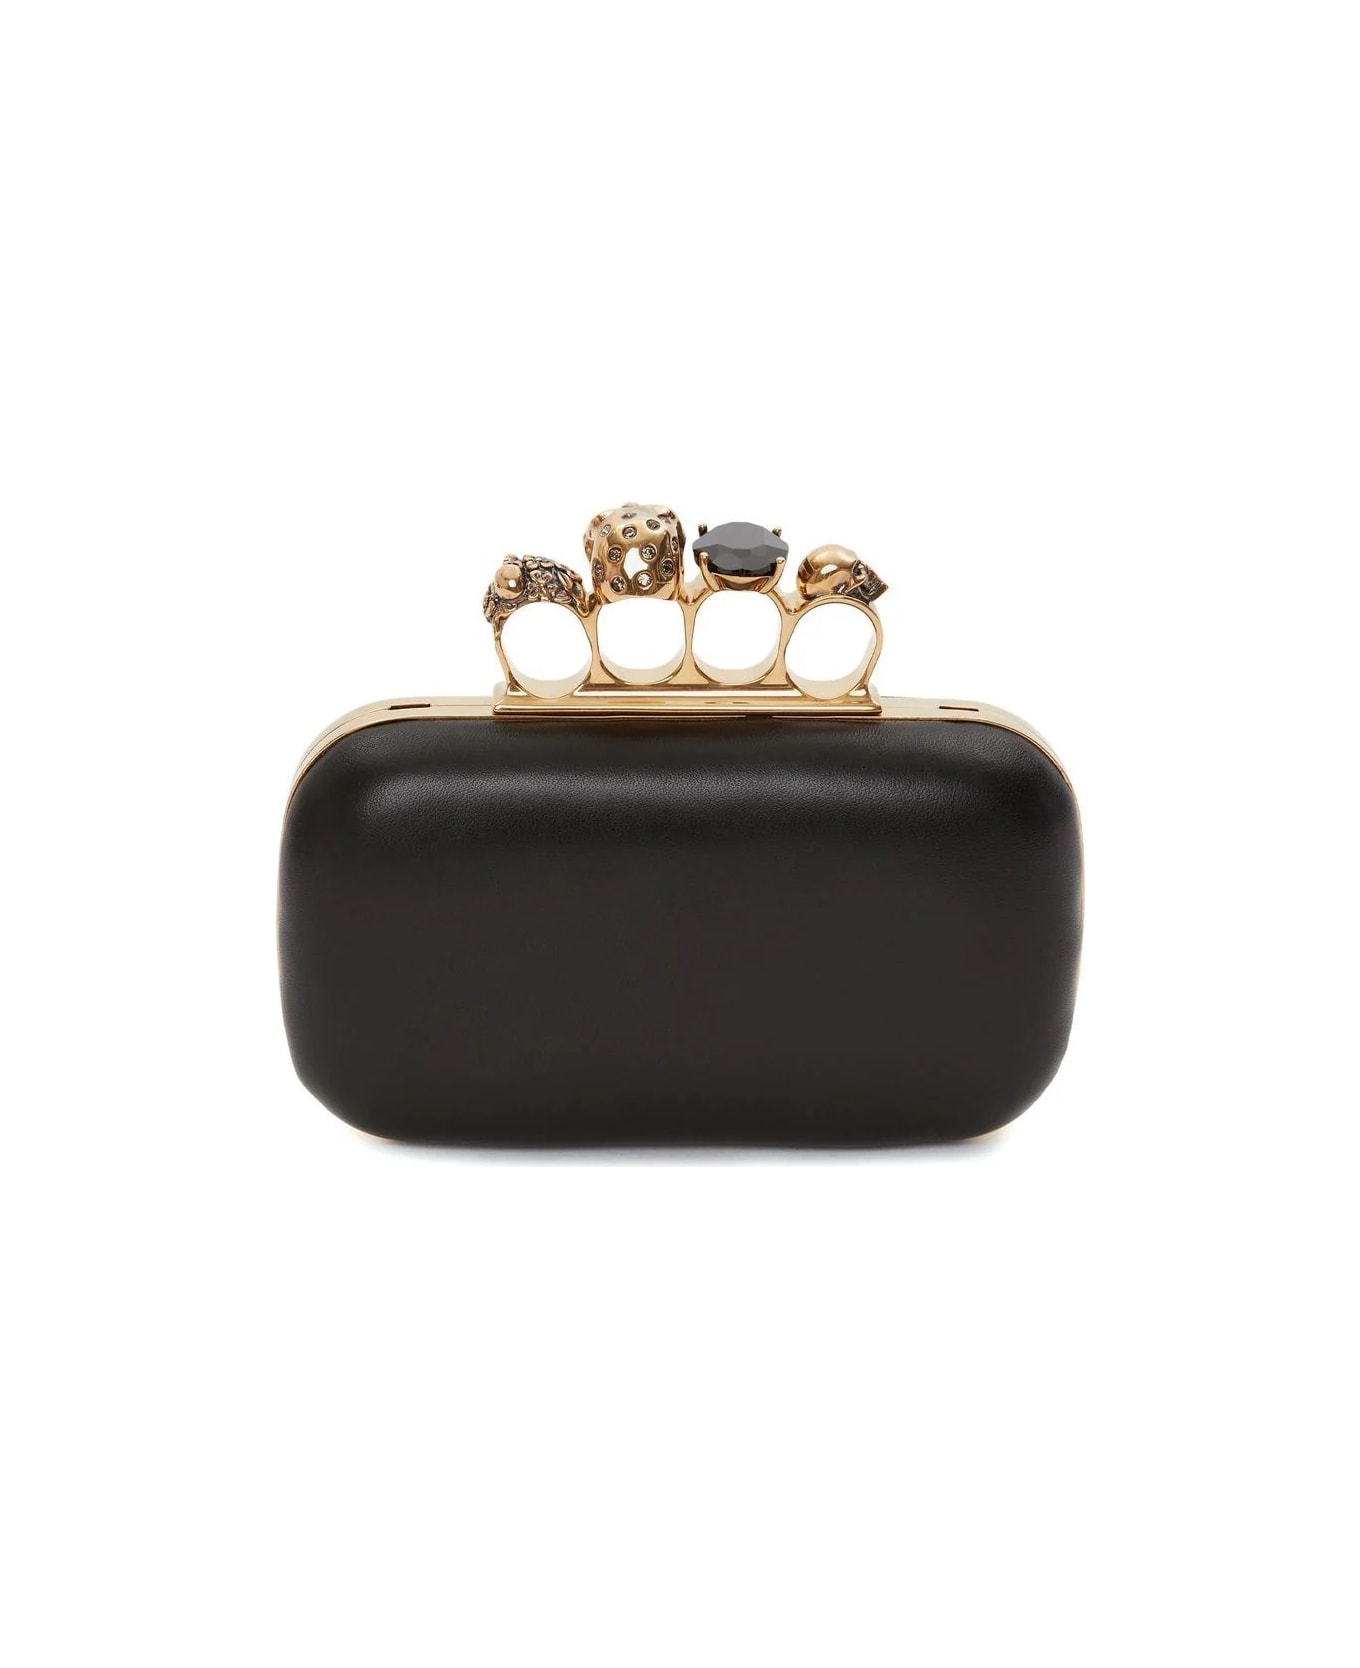 Alexander McQueen Knuckle Clutch With Chain In Black - Black クラッチバッグ